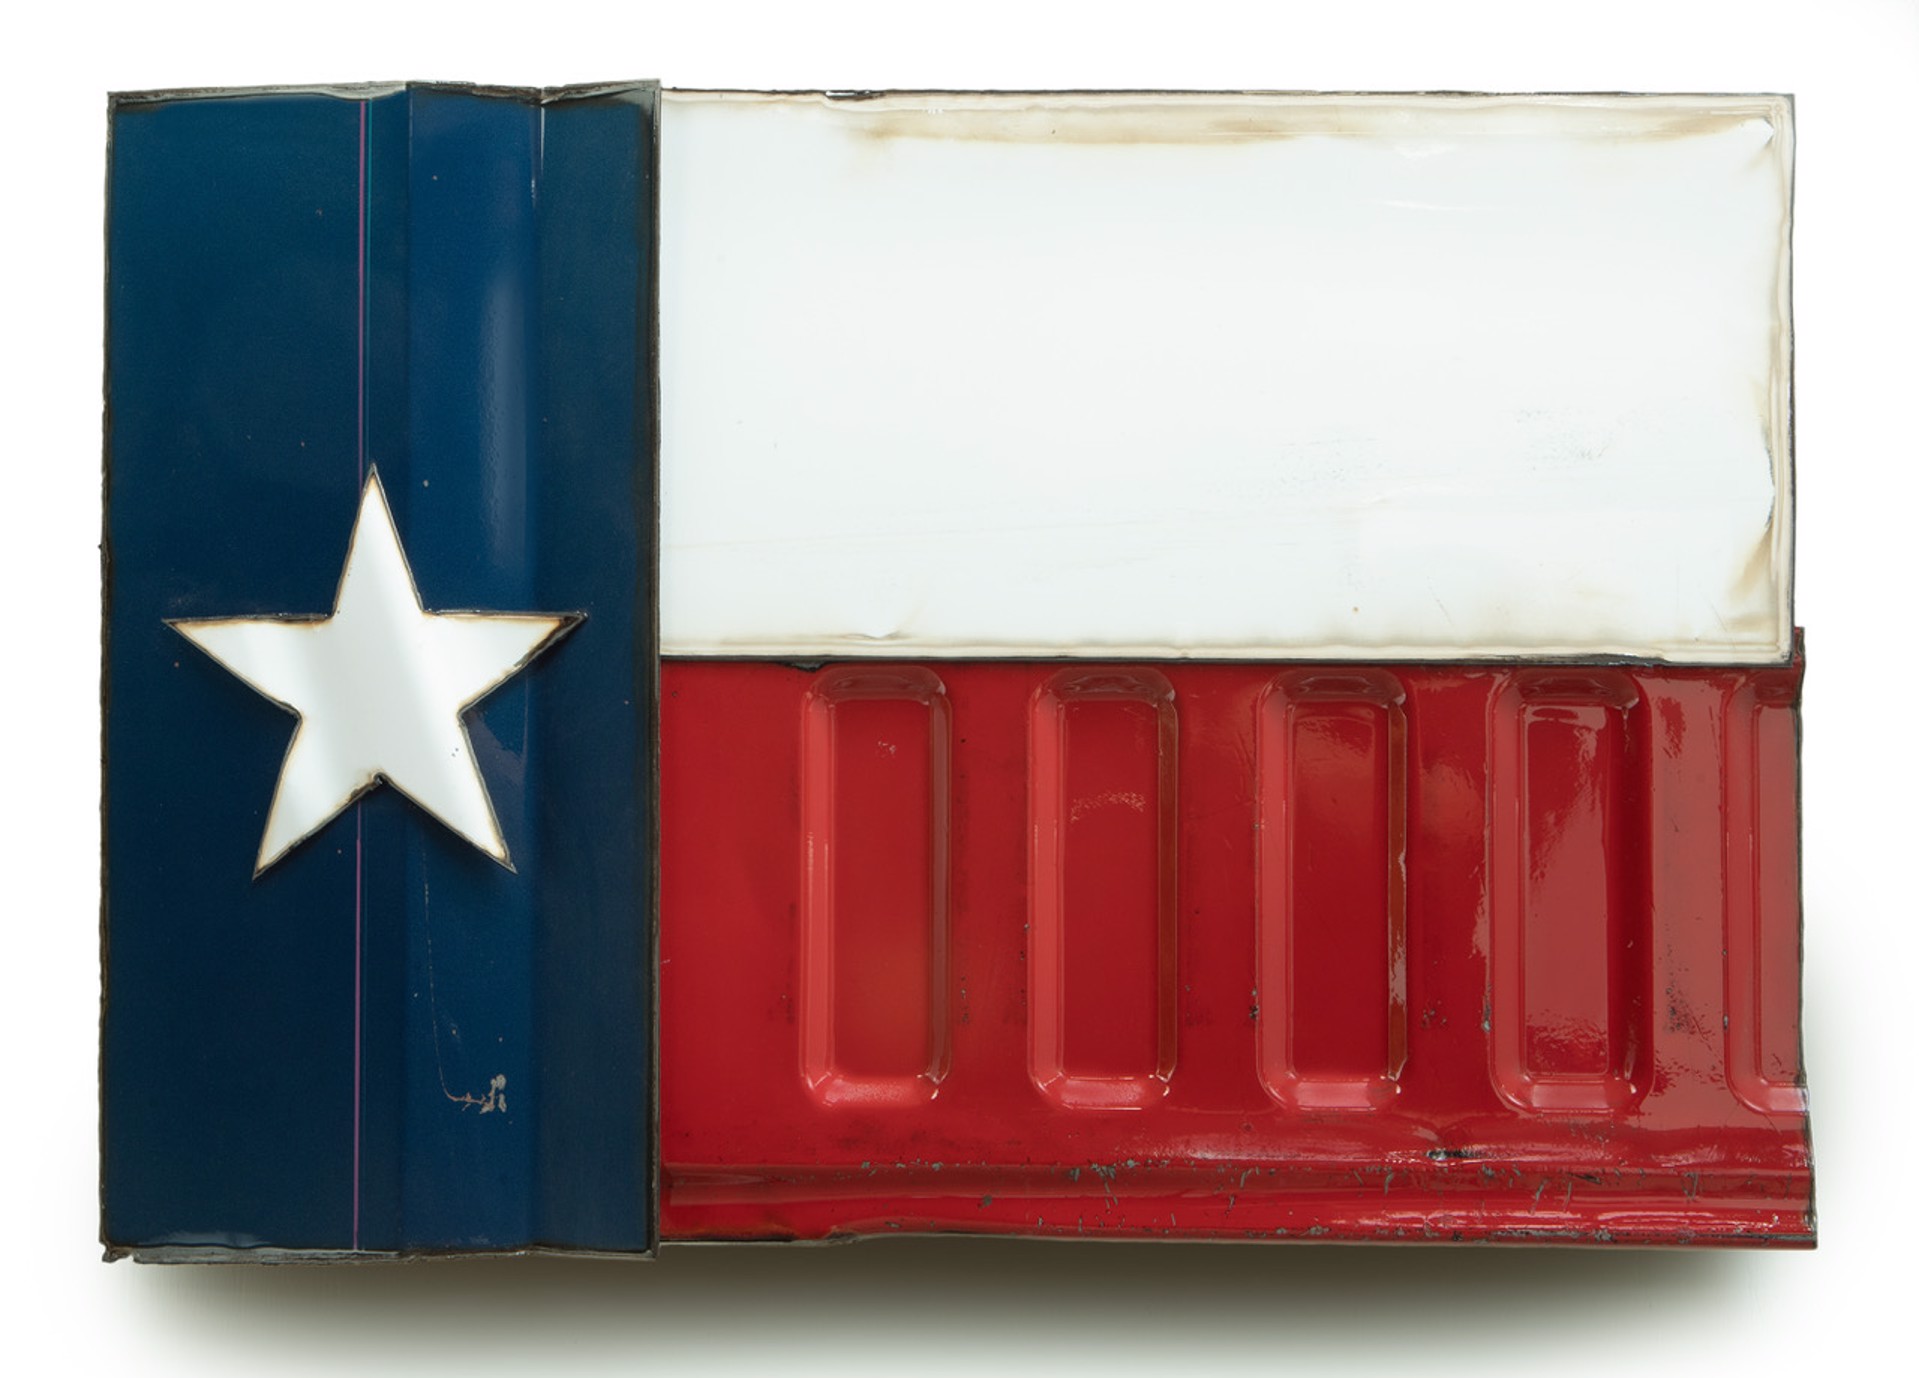 Lone Star (no. 2) by Scott McMillin